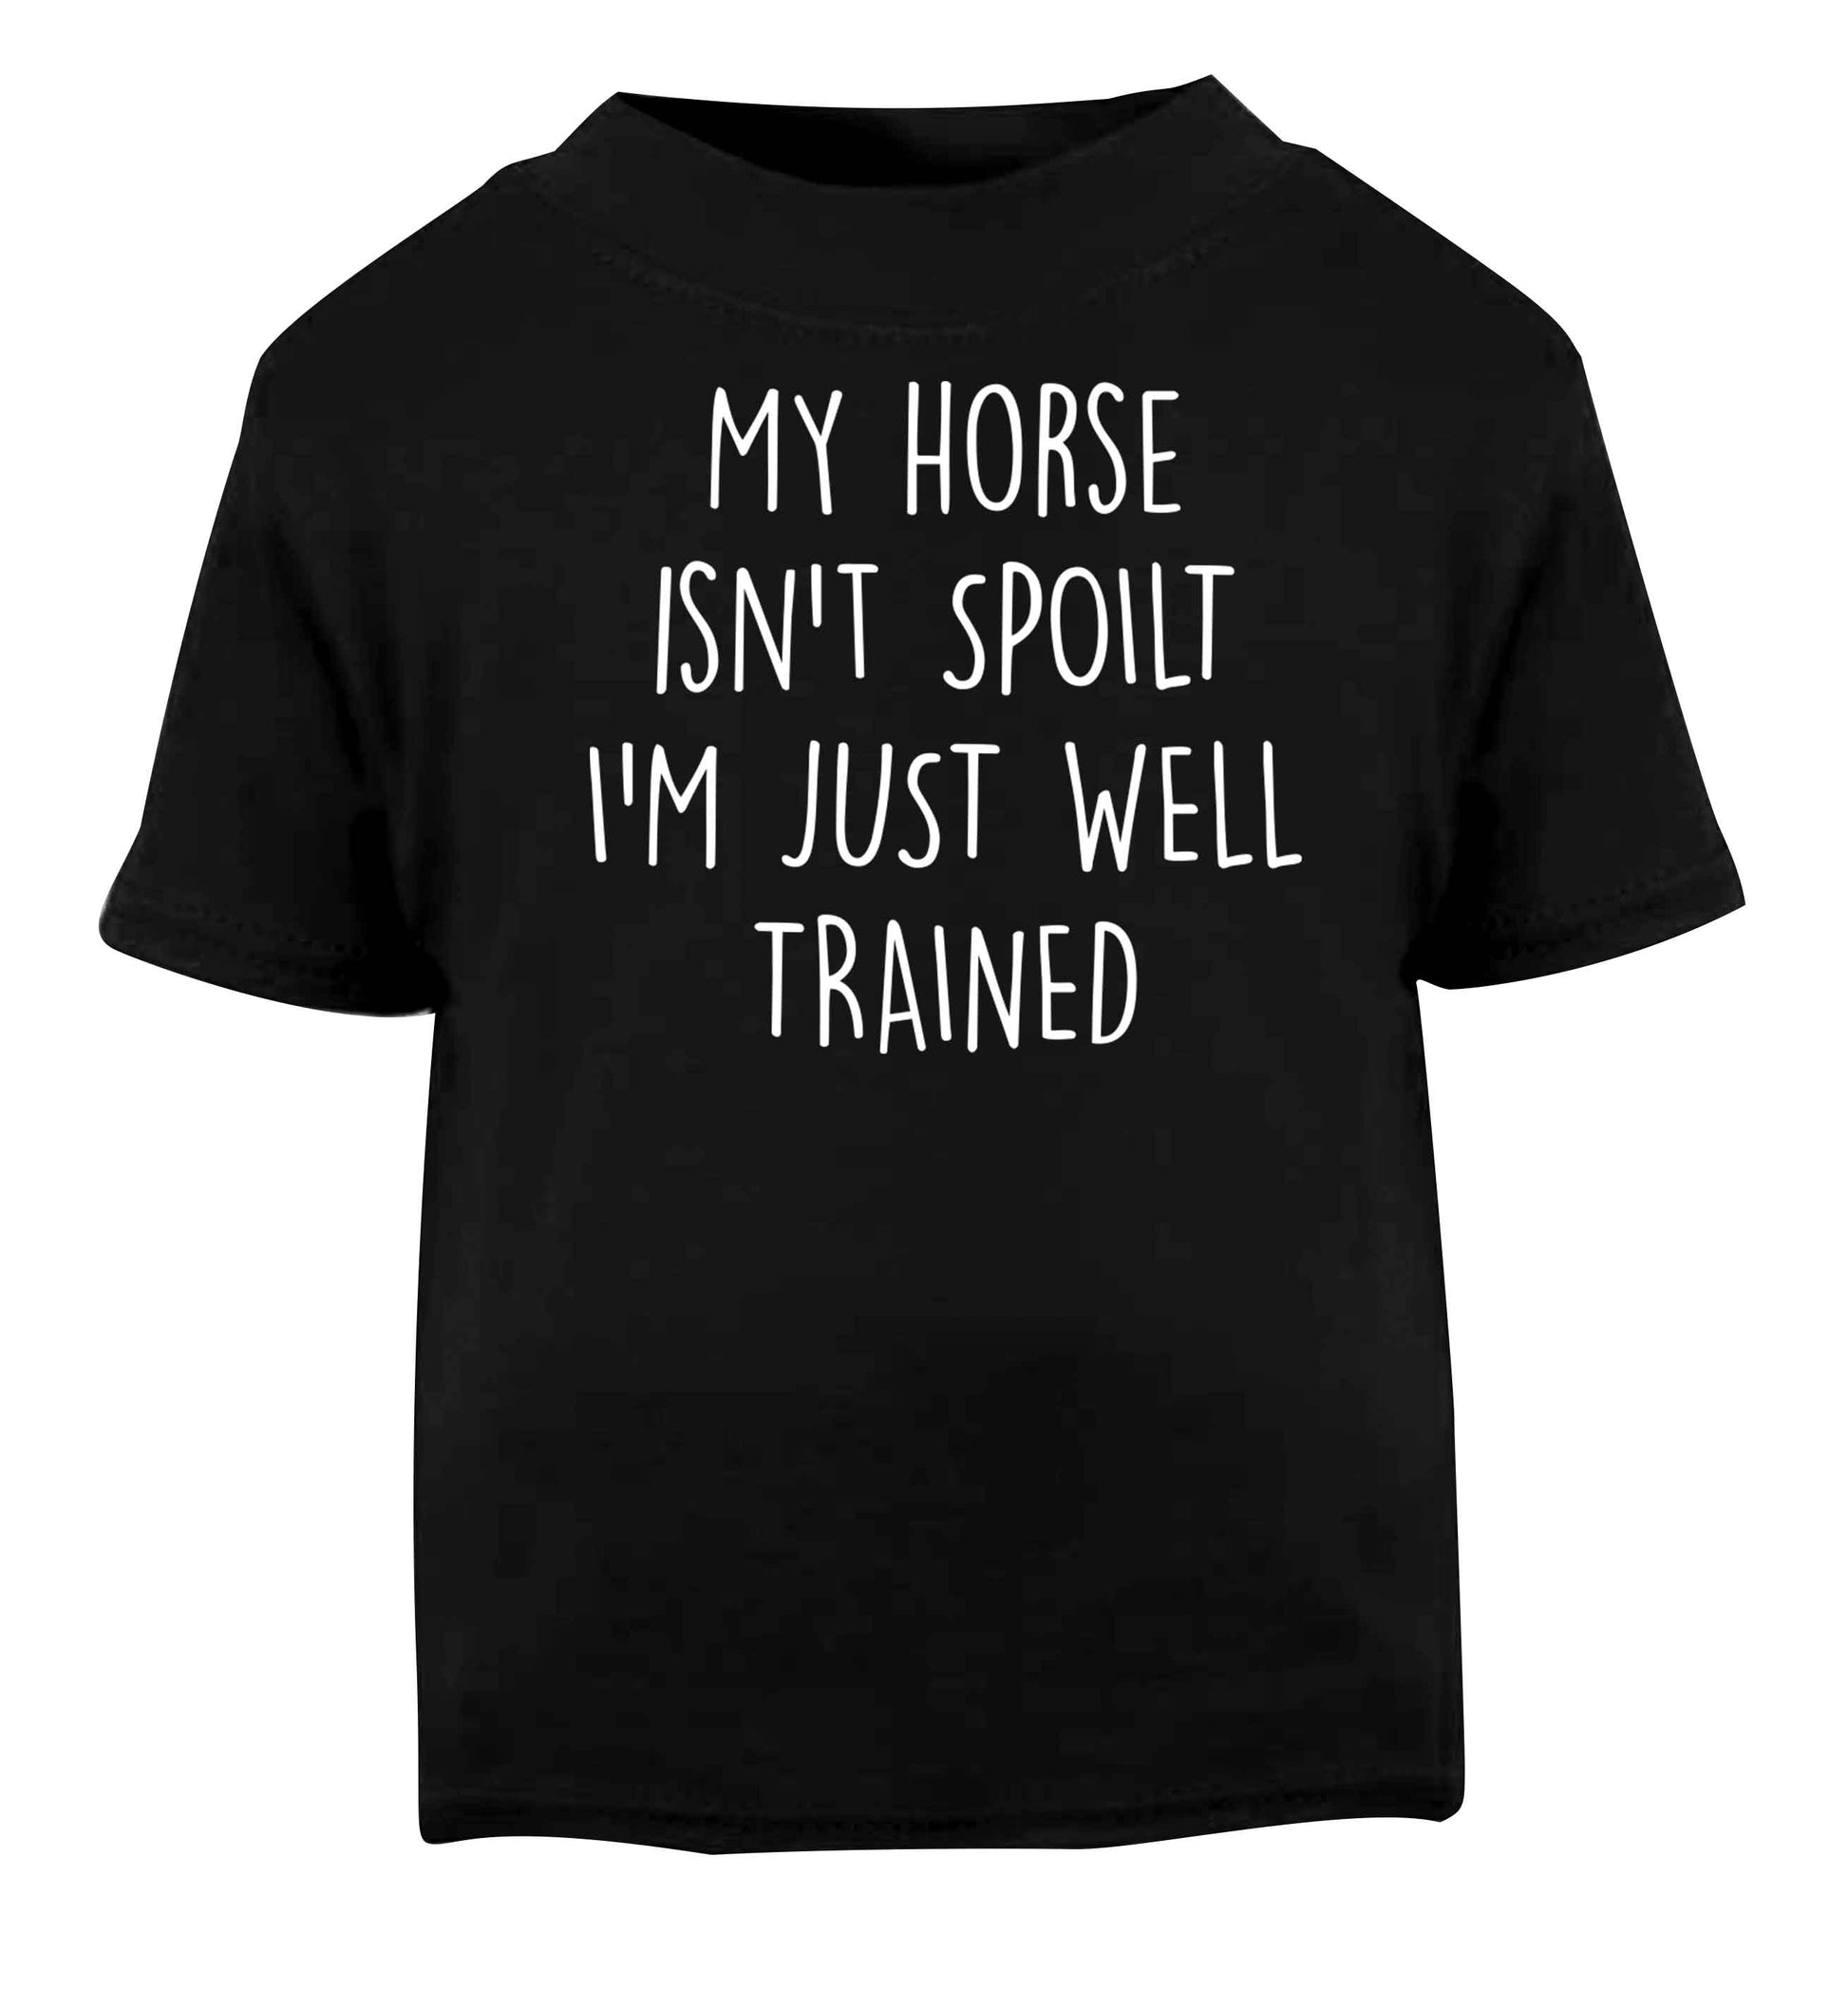 My horse isn't spoilt I'm just well trained Black baby toddler Tshirt 2 years